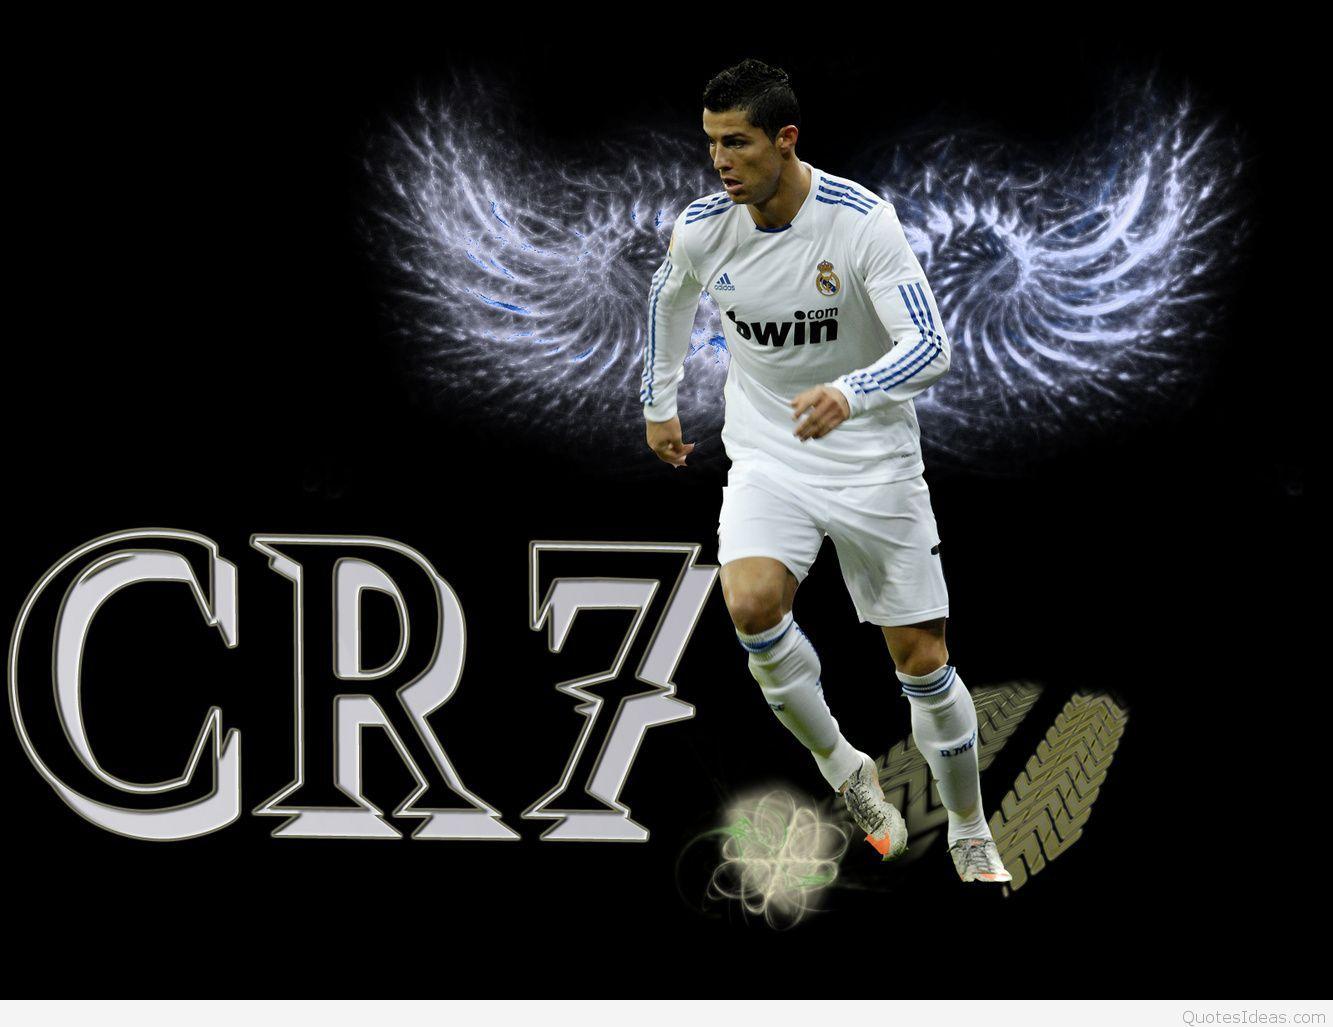 Backside Of Ronaldo Is Wearing White Sports Dress In Sparkles Background HD  Ronaldo Wallpapers  HD Wallpapers  ID 59958